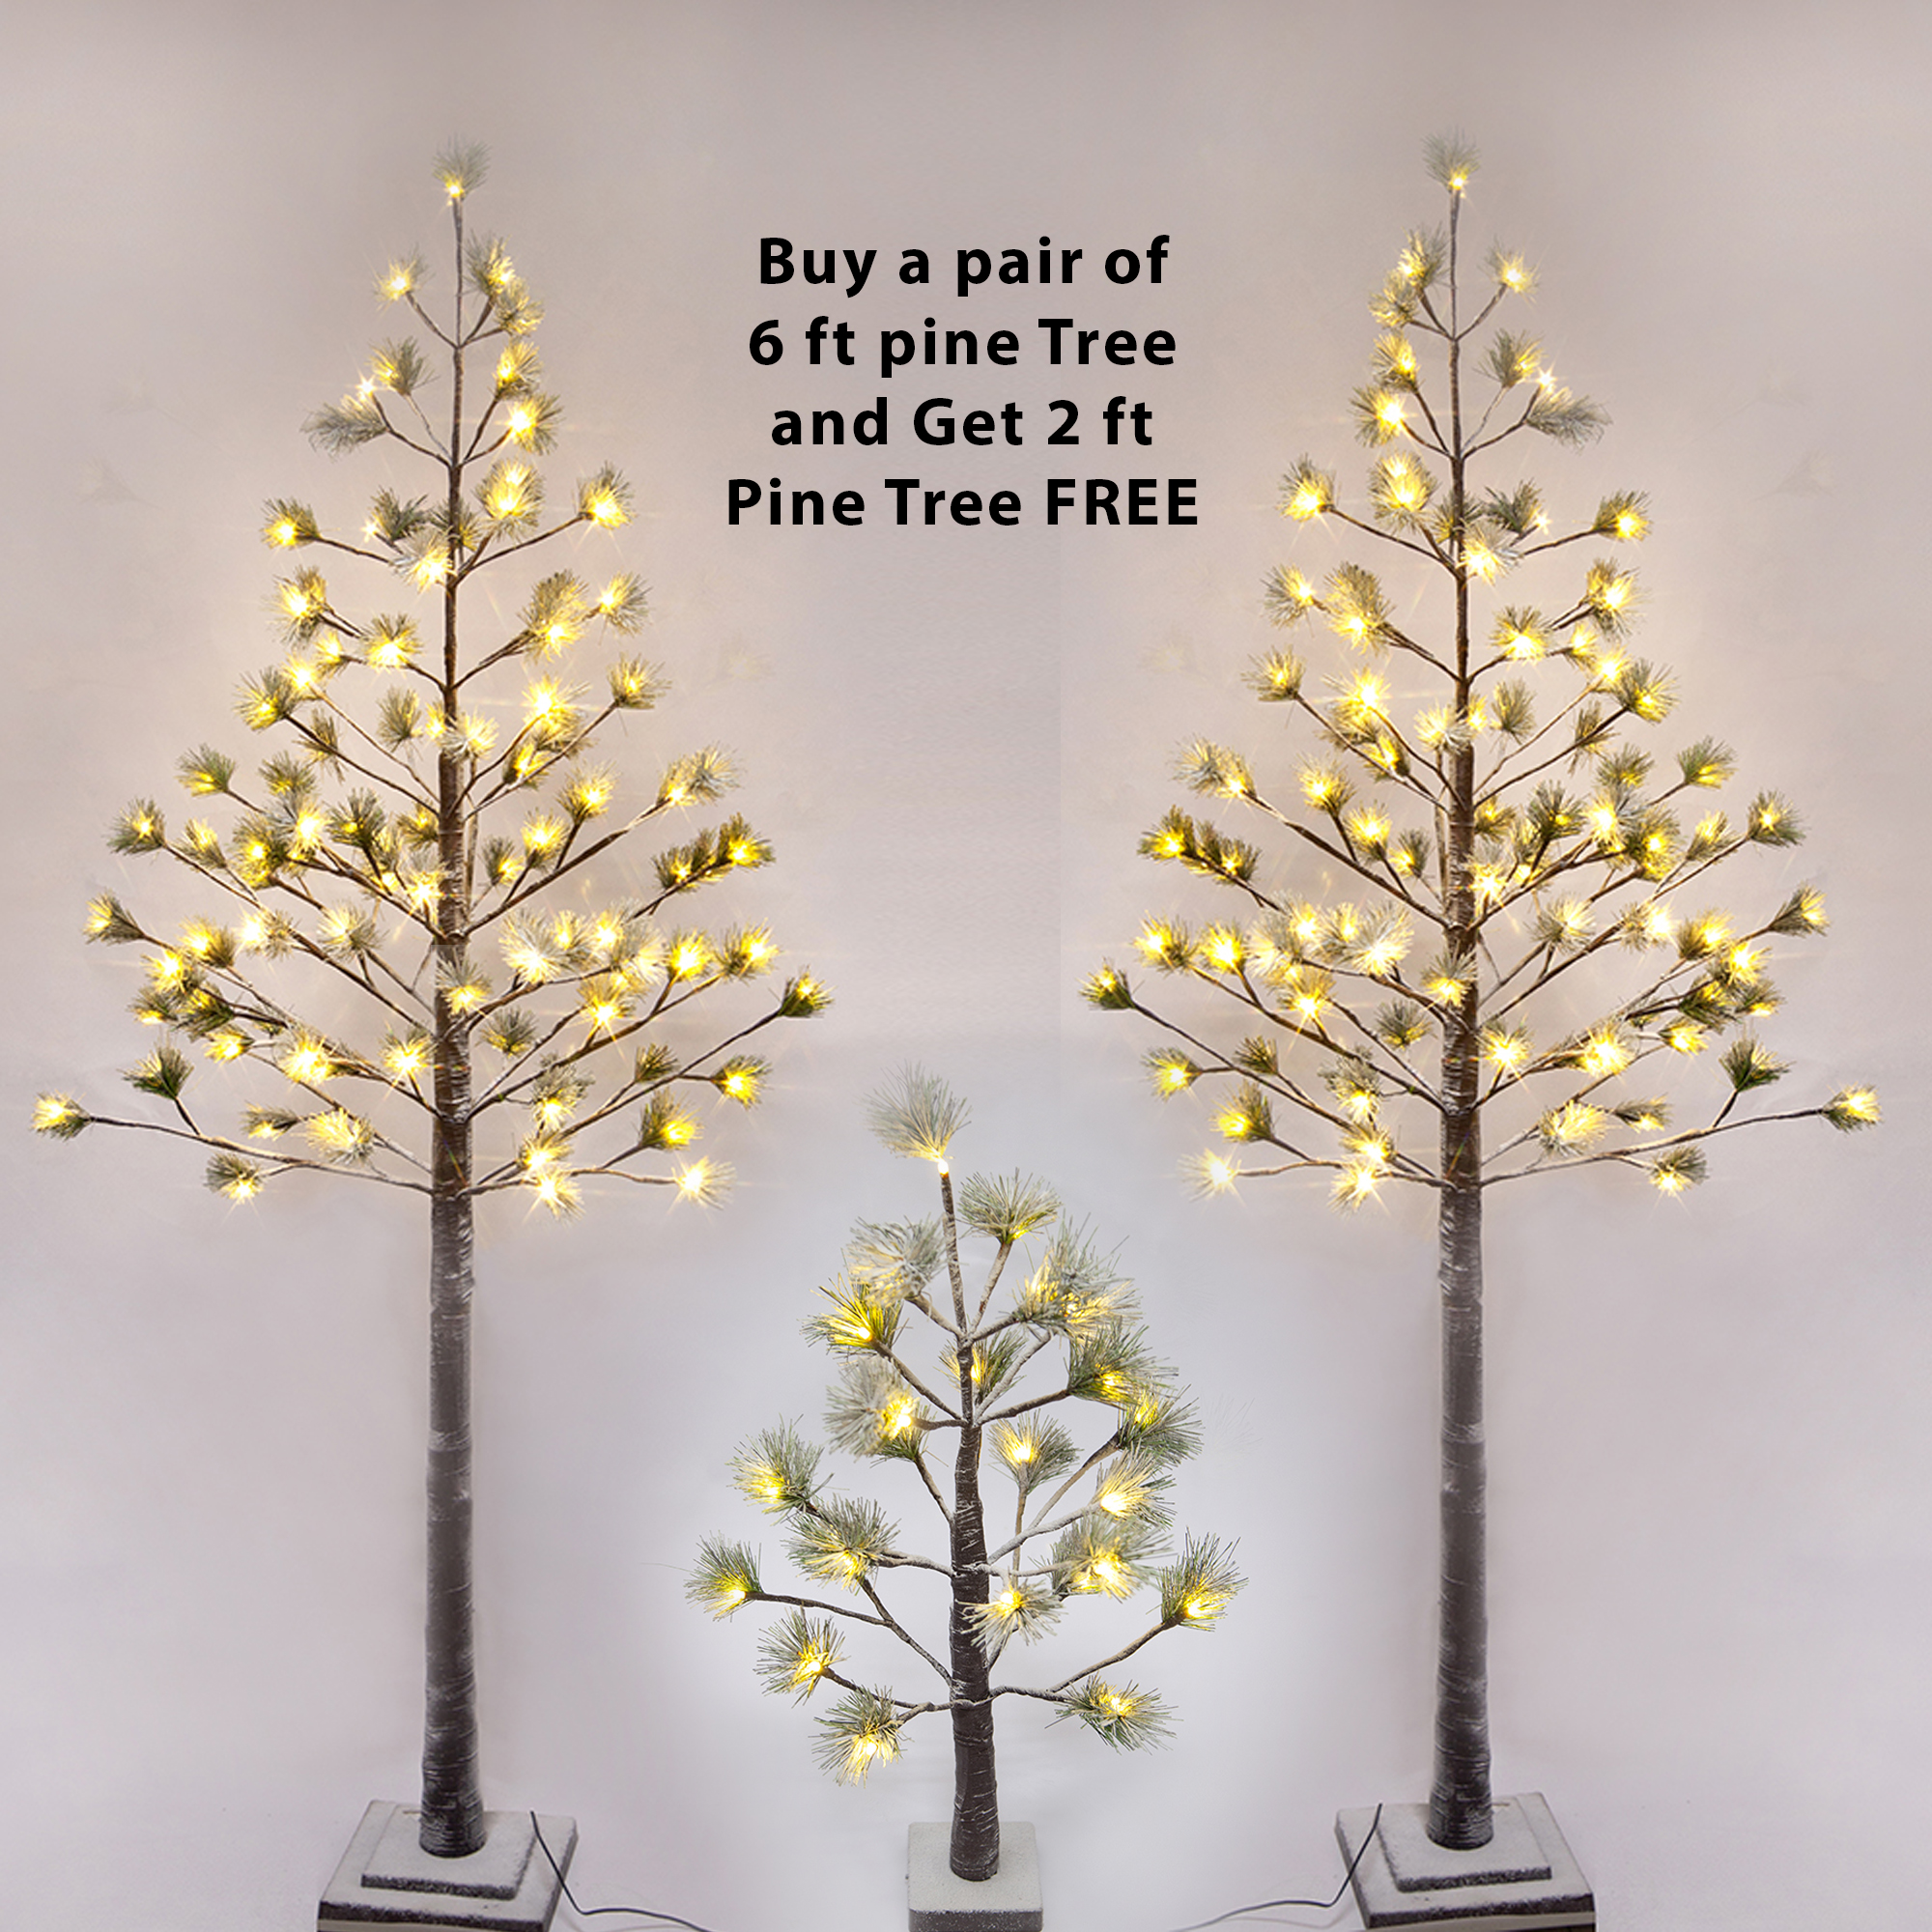 Buy a pair of 6 ft Pre-lit Christmas tree and get a 2 ft height Pre-lit Christmas tree FREE